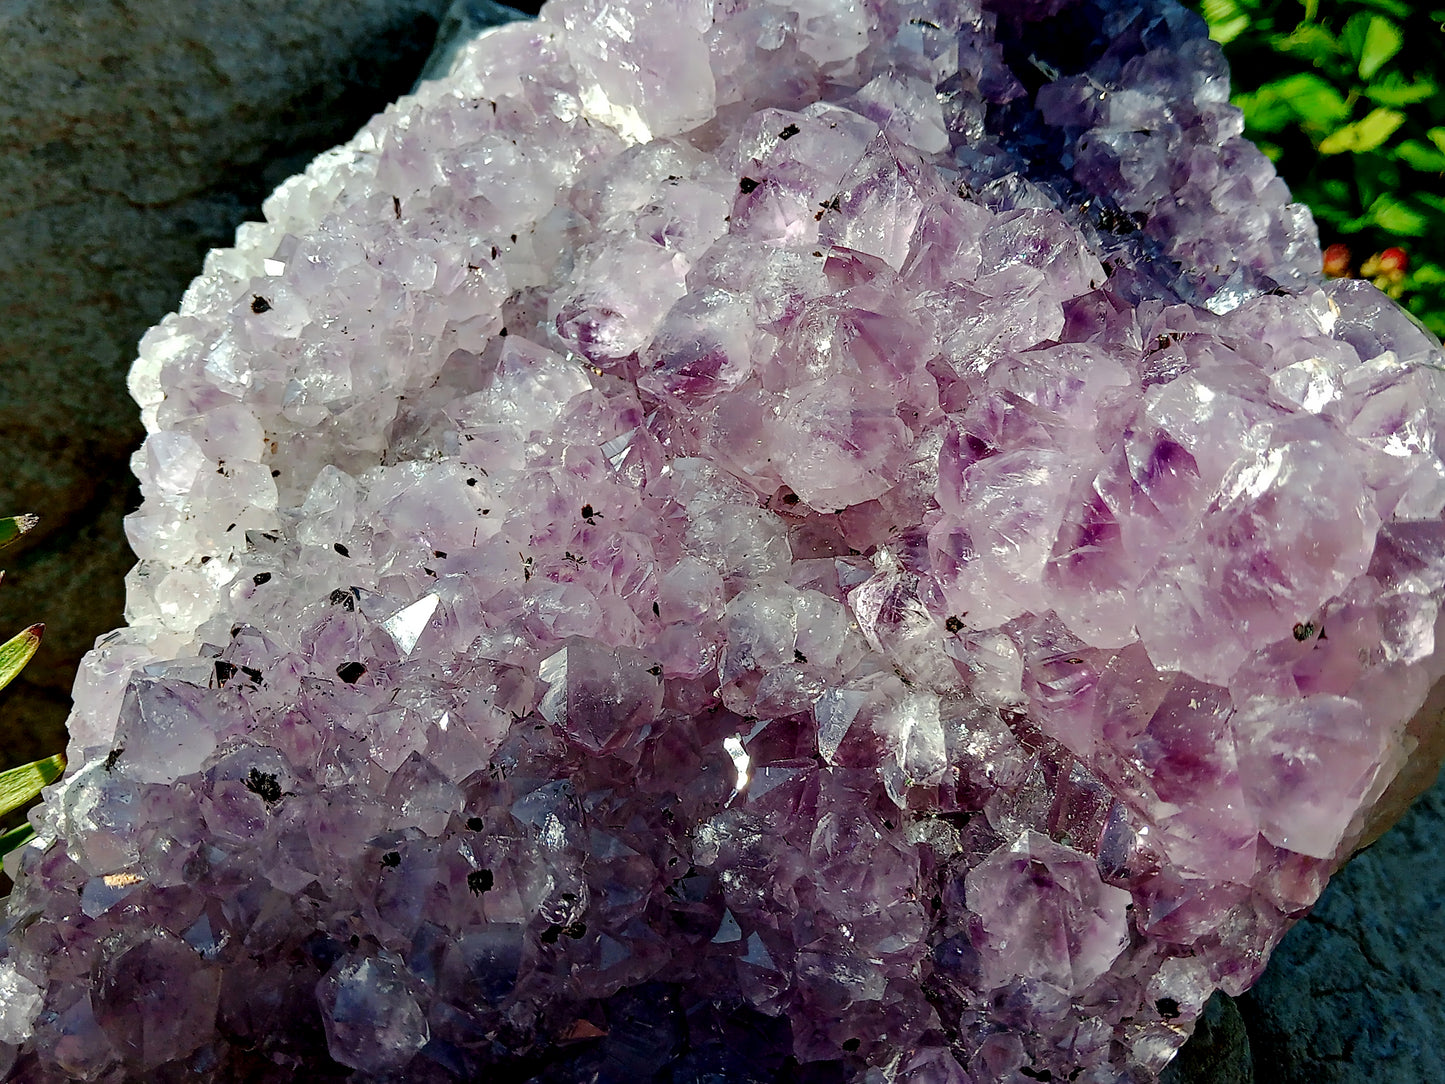 Amethyst drusen with inclusions